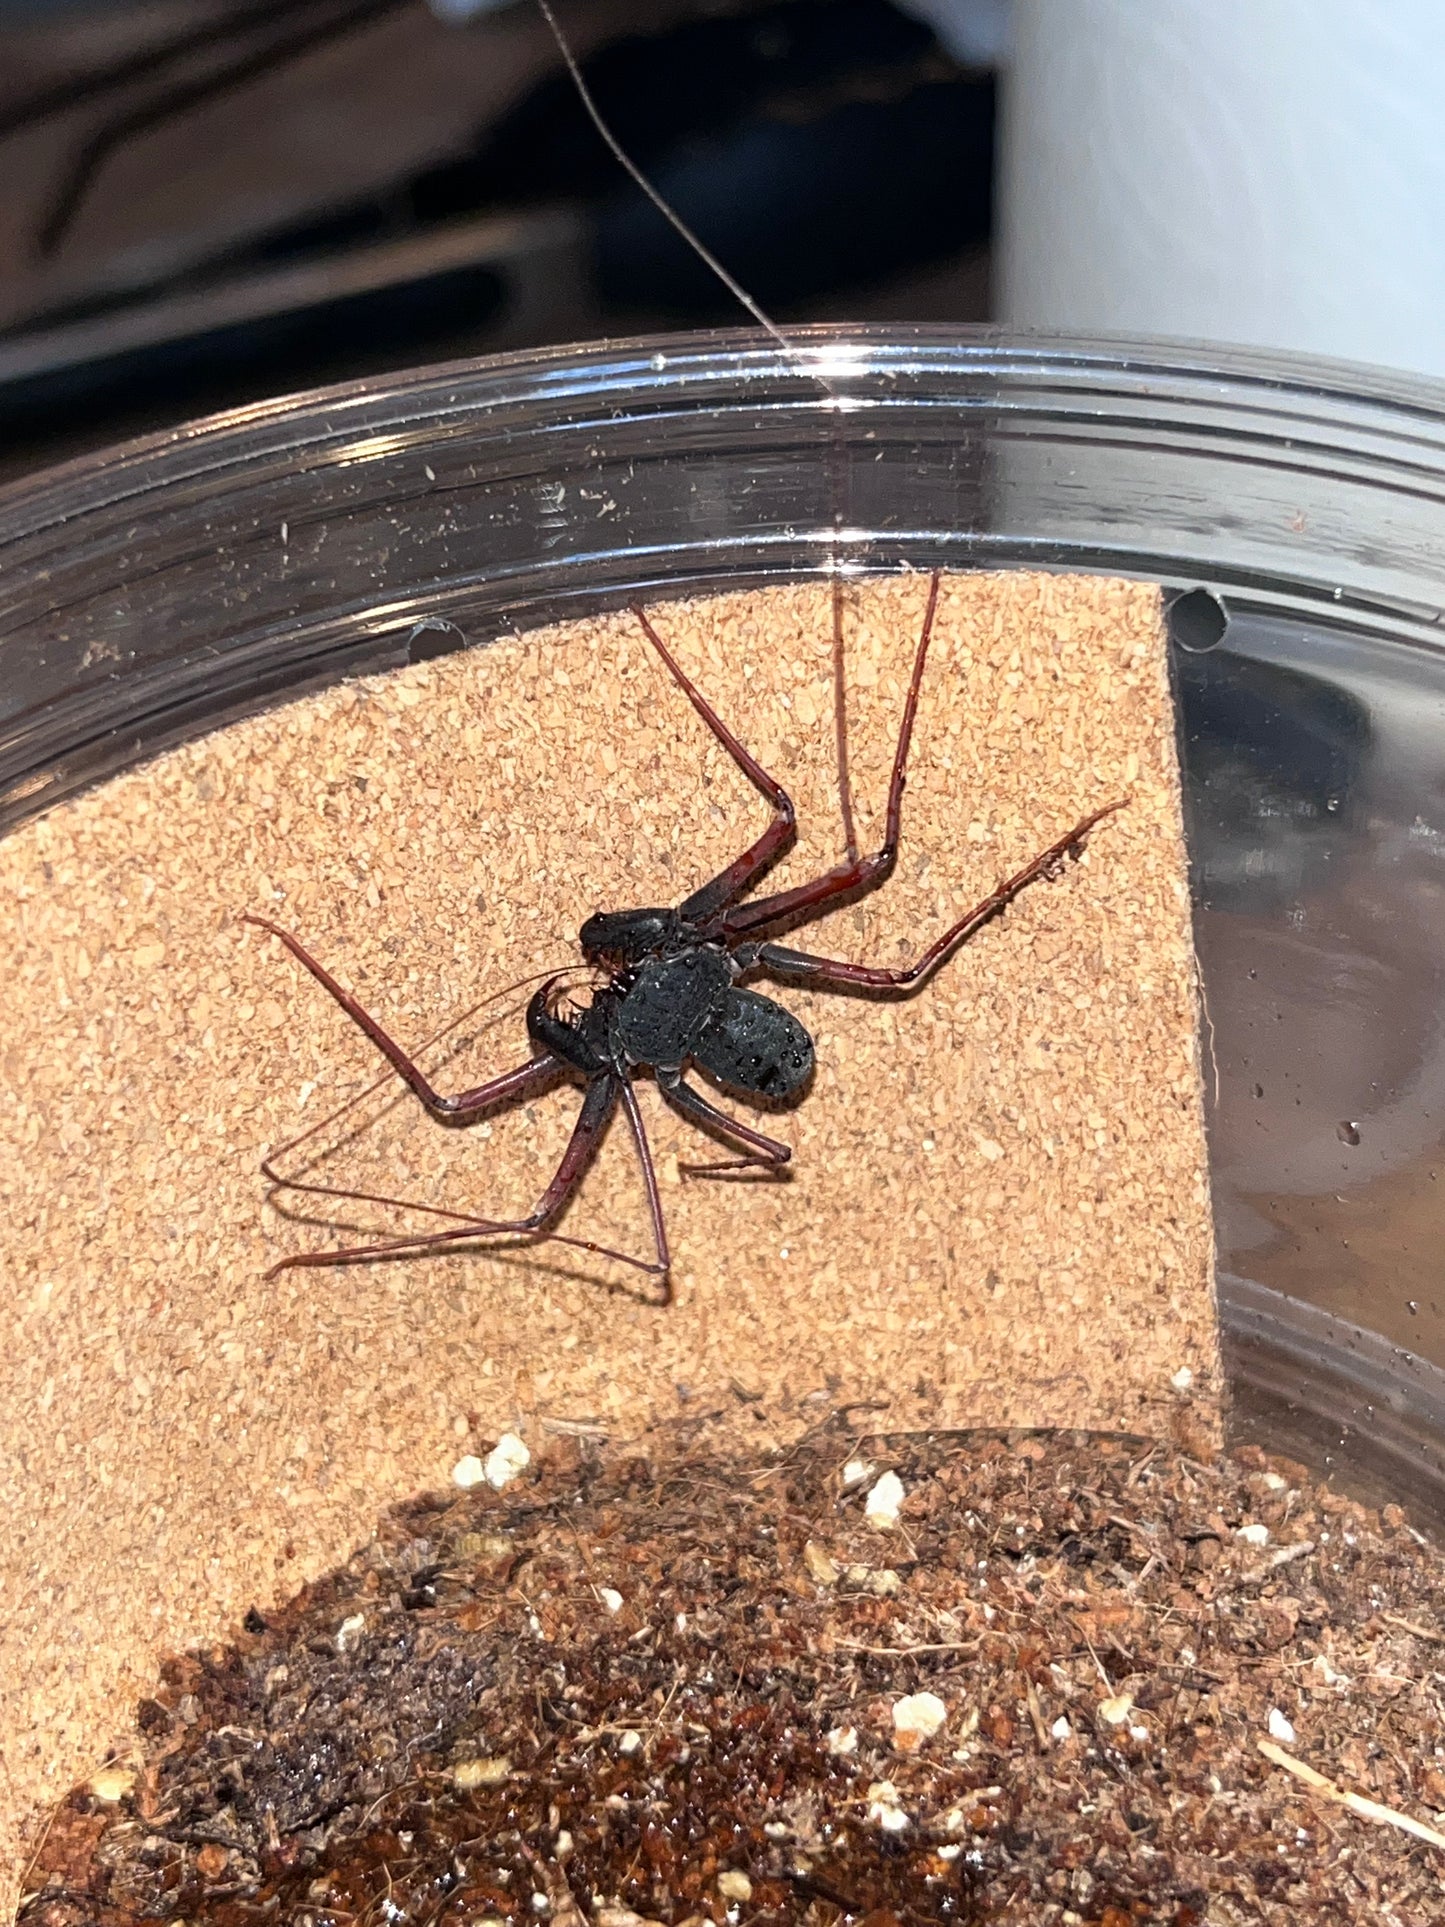 Phrynus Whitei (Central American Tailless Whipspider)